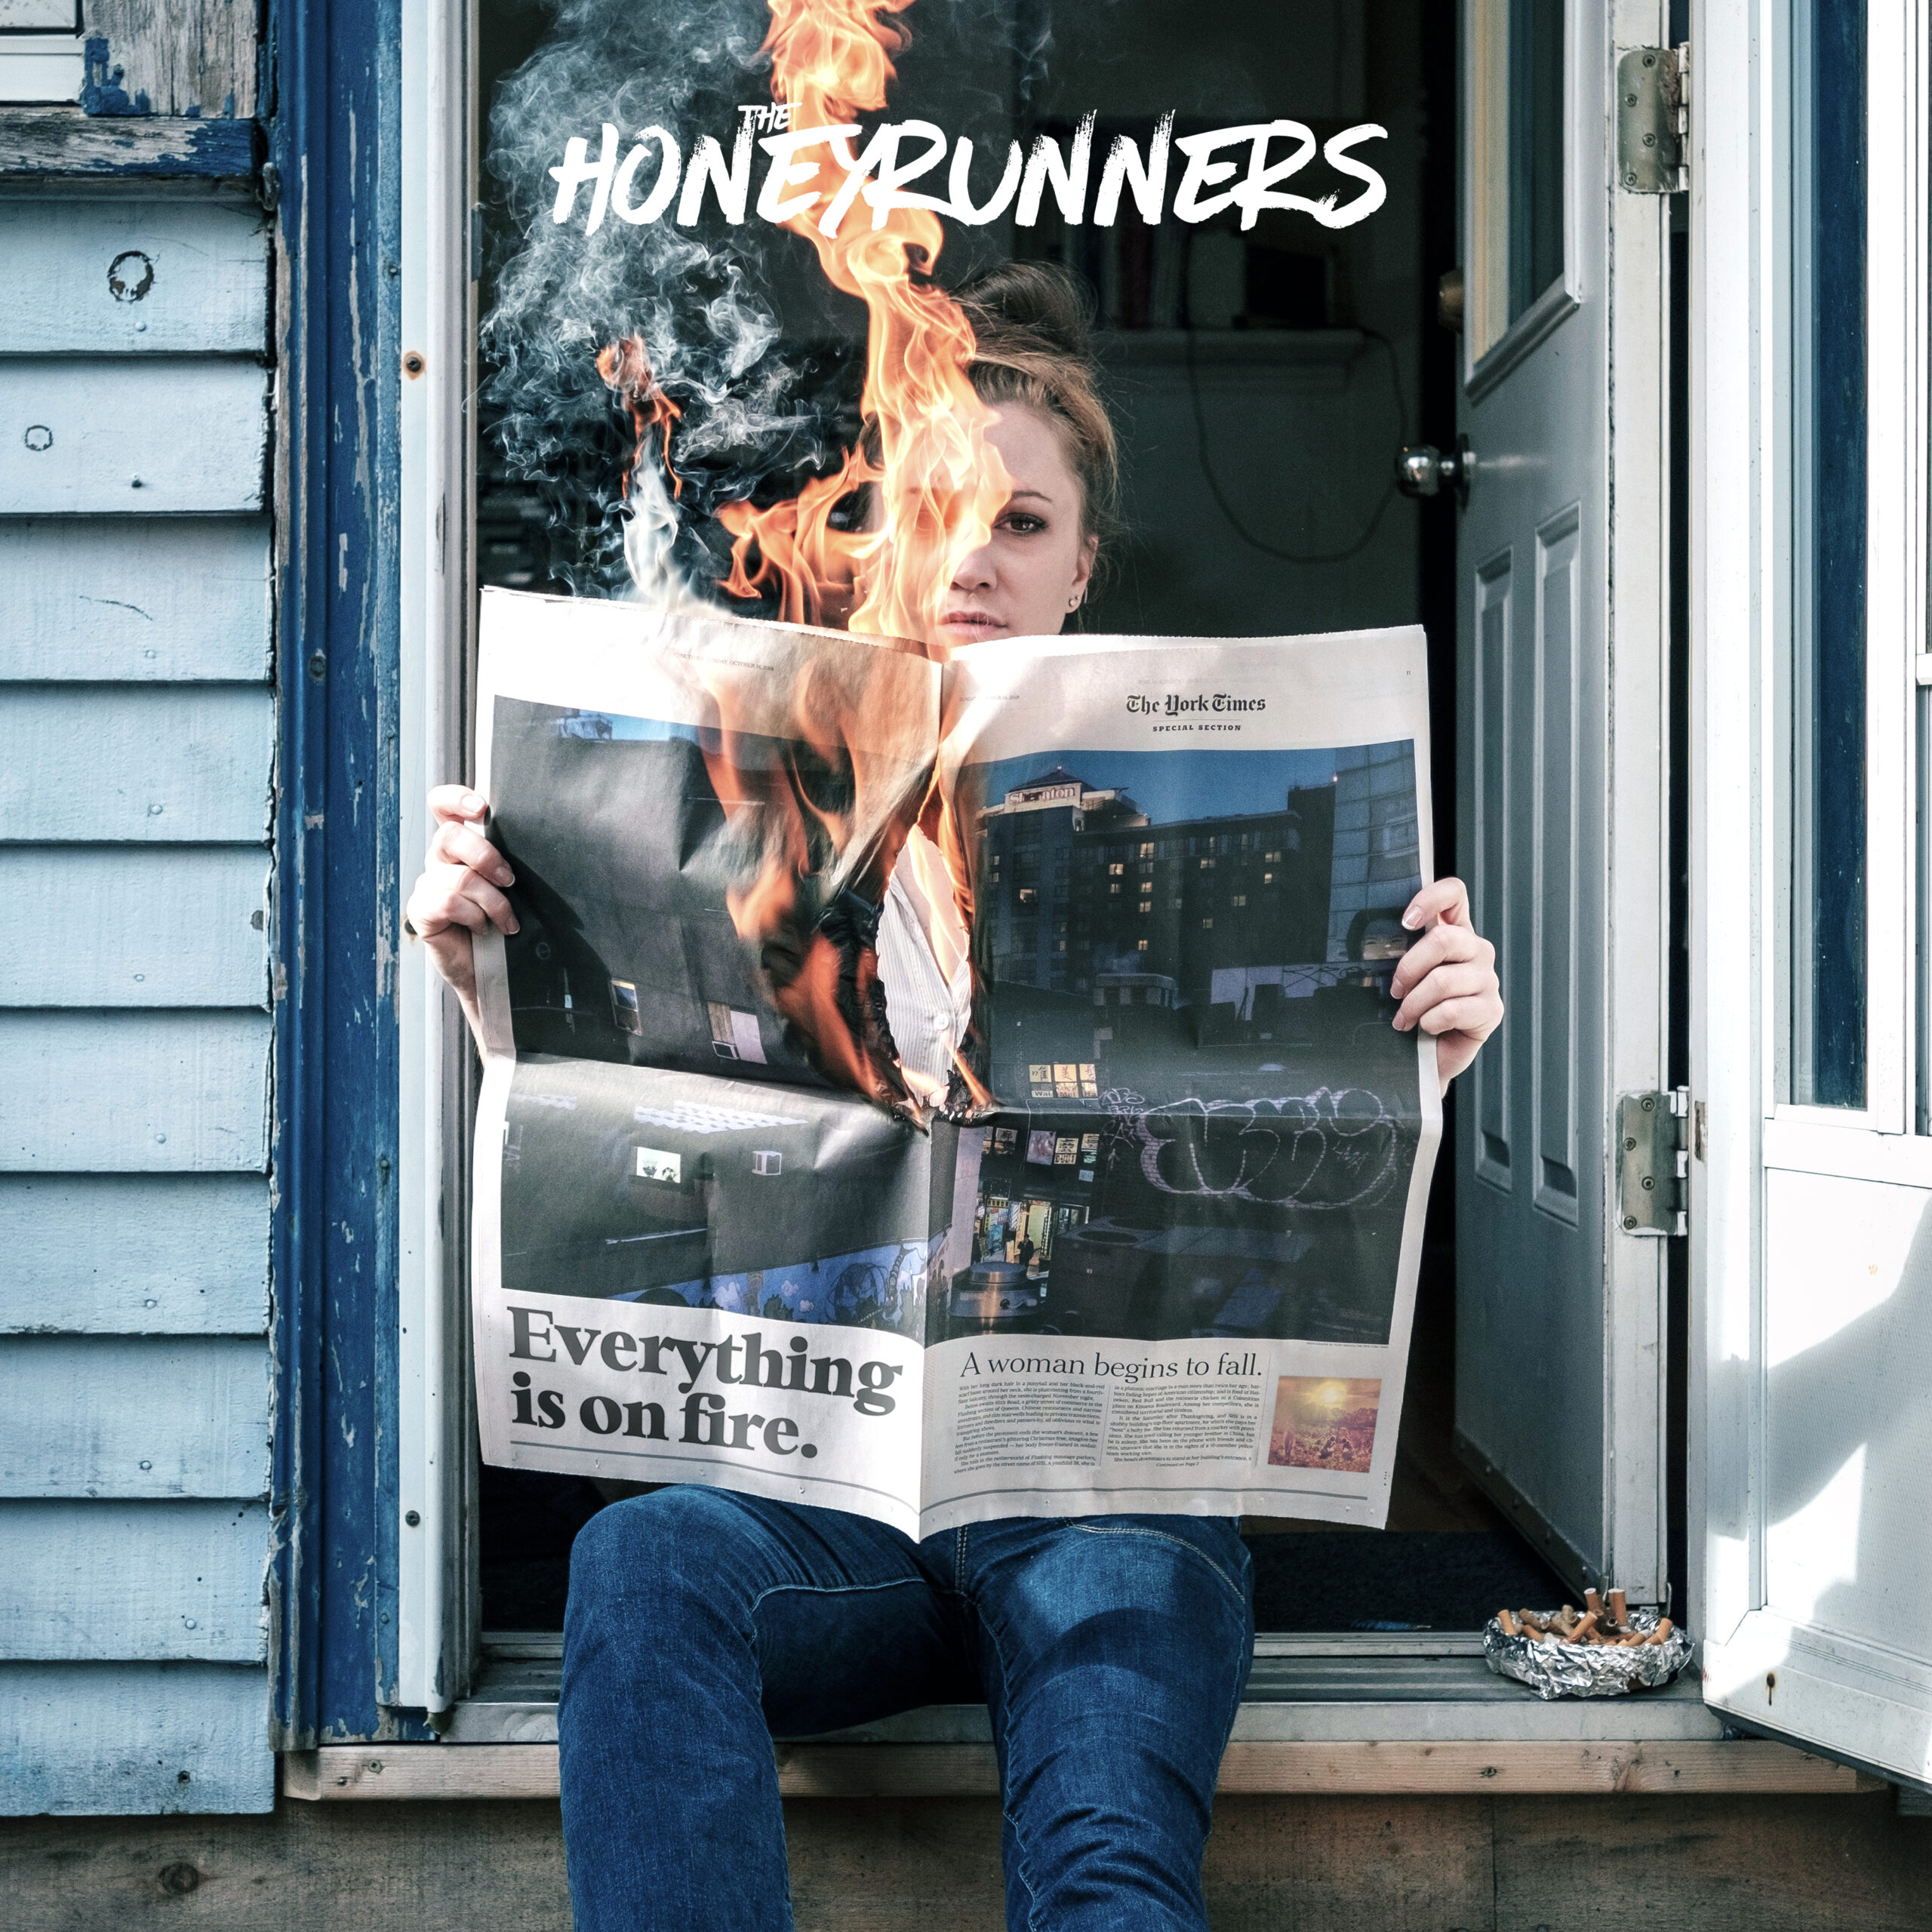 The Honeyrunners, release their debut LP “Everything Is On Fire”